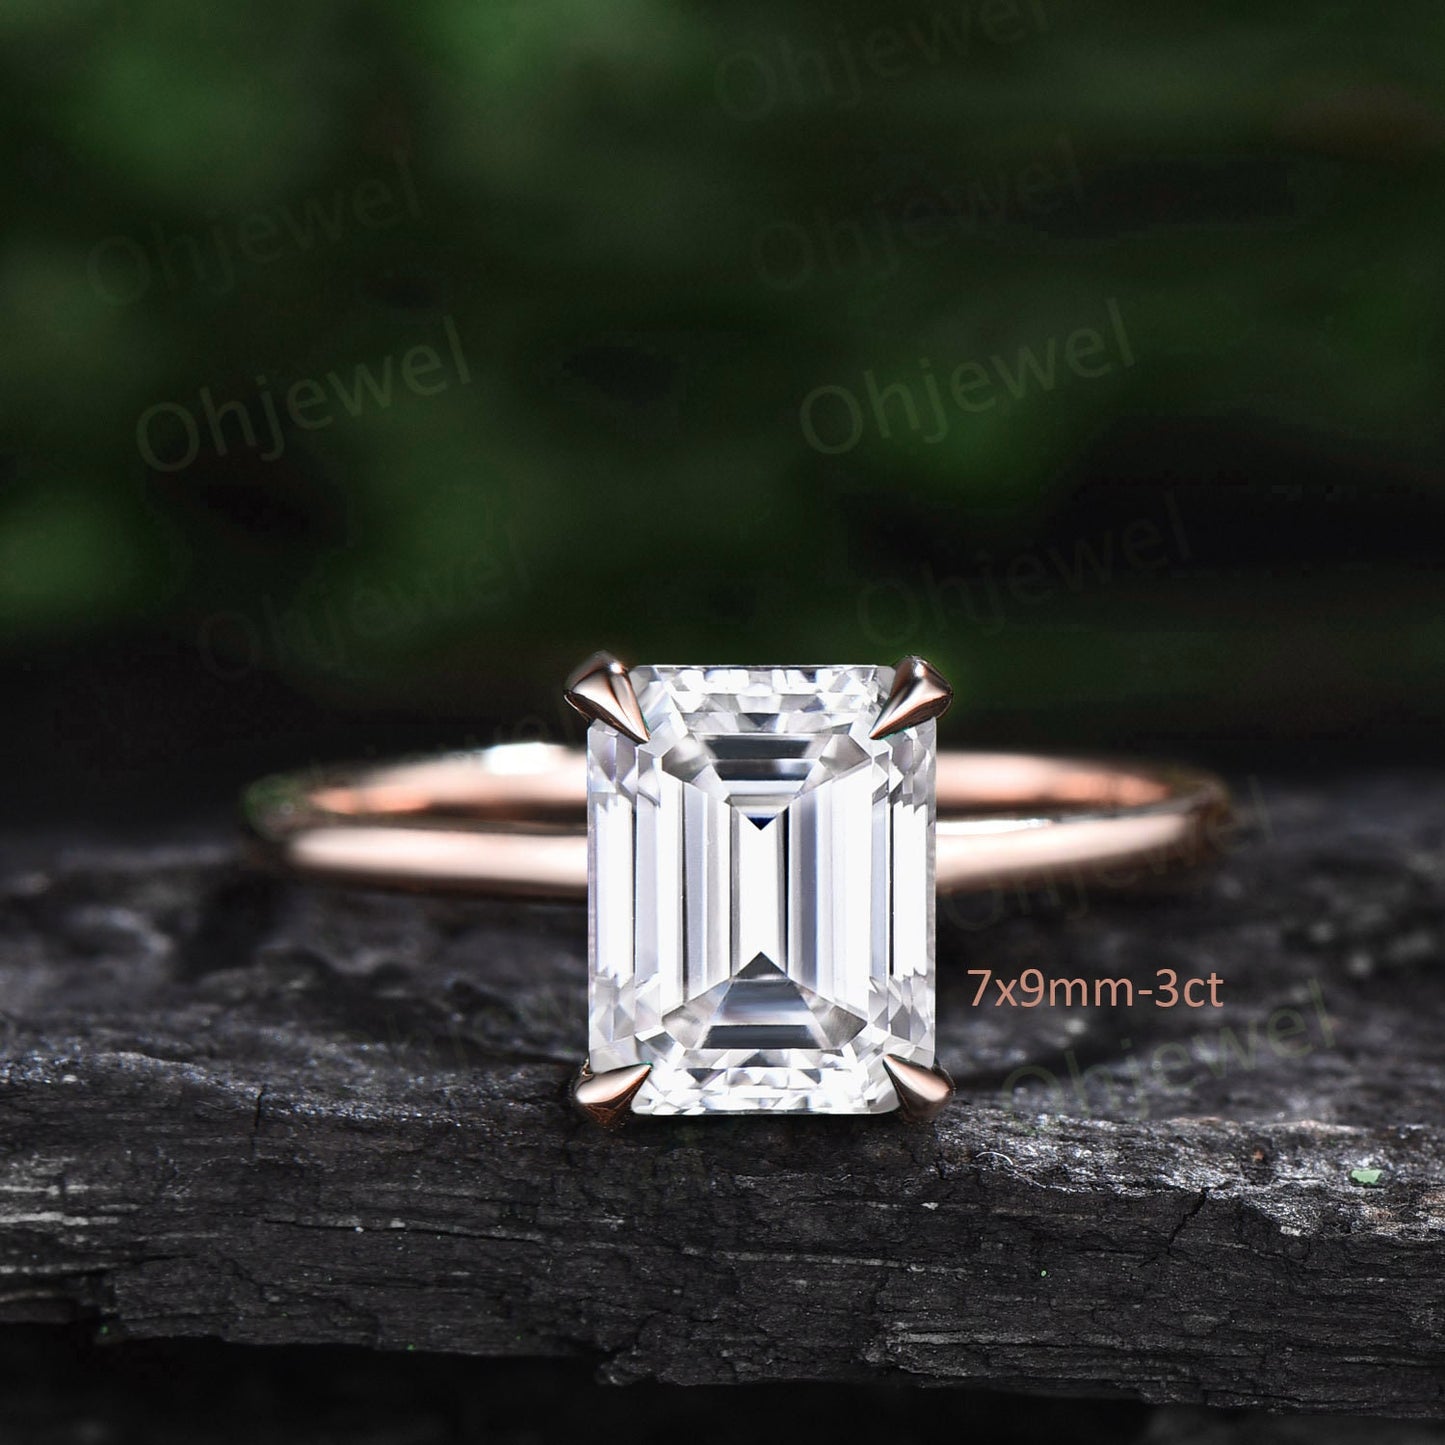 4ct emerald cut moissanite engagement ring rose gold vintage unique Solitaire engagement ring women wedding bridal promise ring gift for her